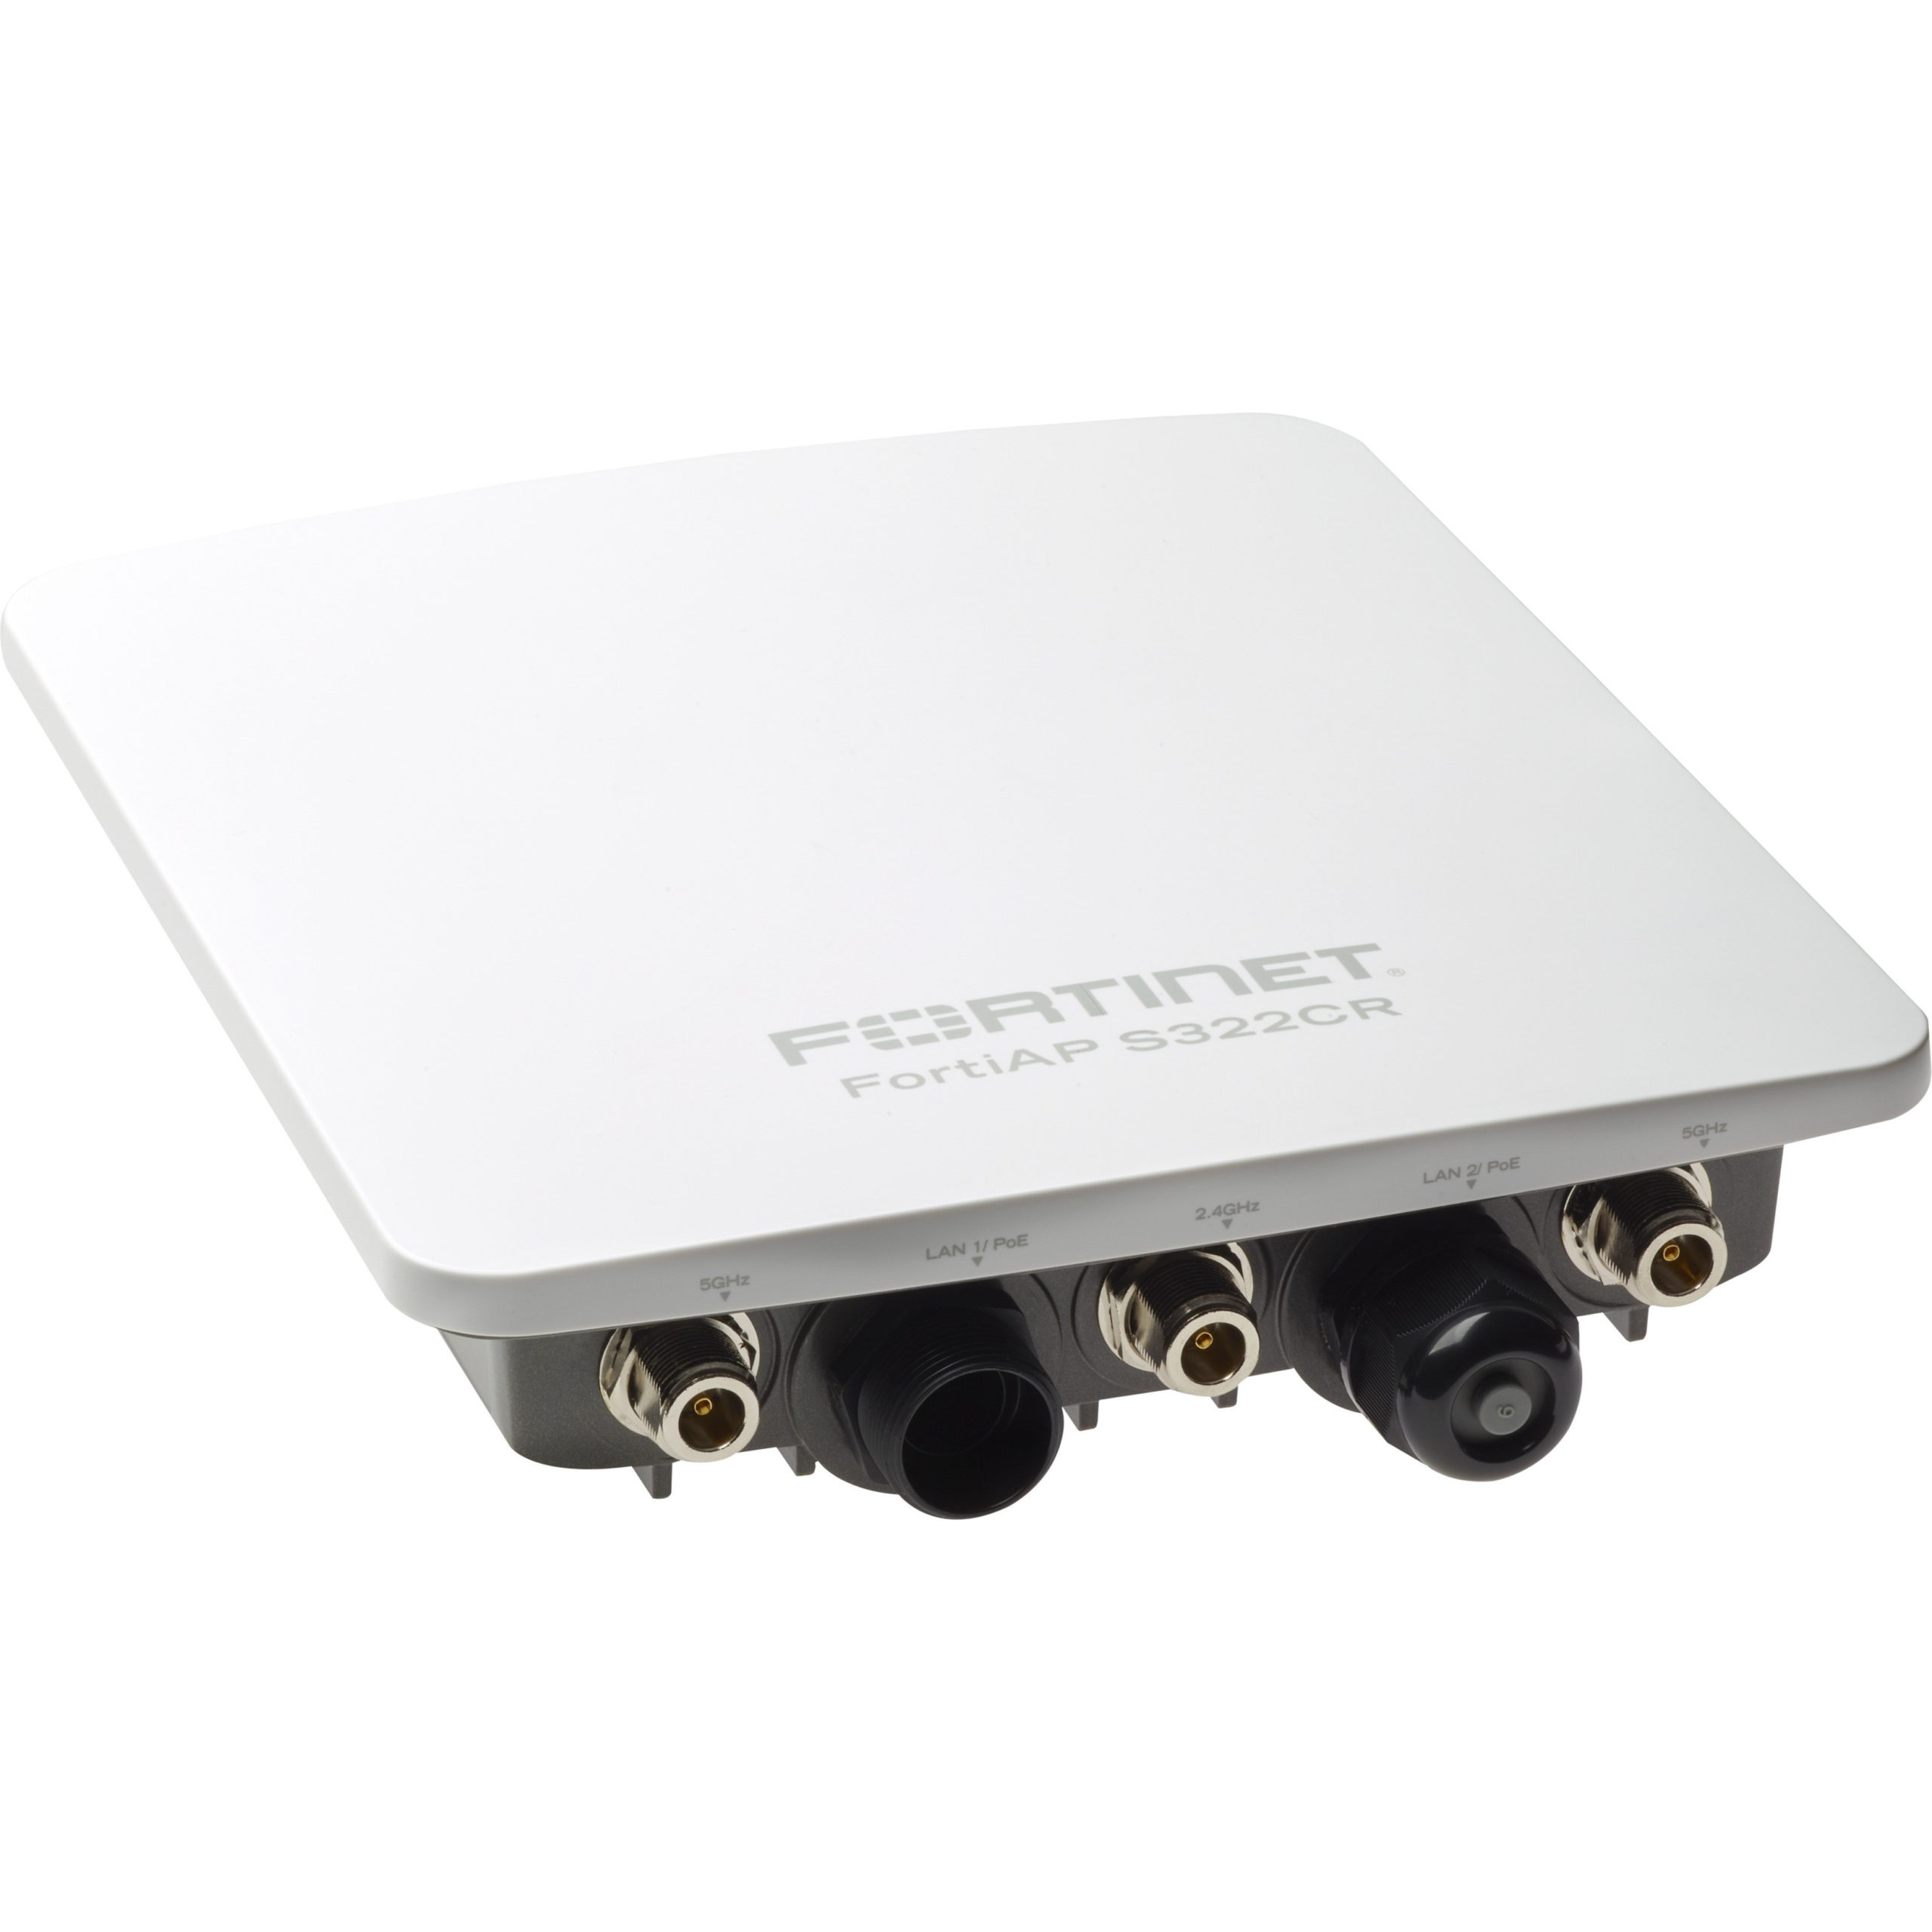 Fortinet FortiAP S322CR IEEE 802.11ac 1.30 Gbit/s Wireless Access Point2.40 GHz, 5 GHz2 x Network (RJ-45)Ethernet, Fast Ethernet,… FAP-S322CR-A